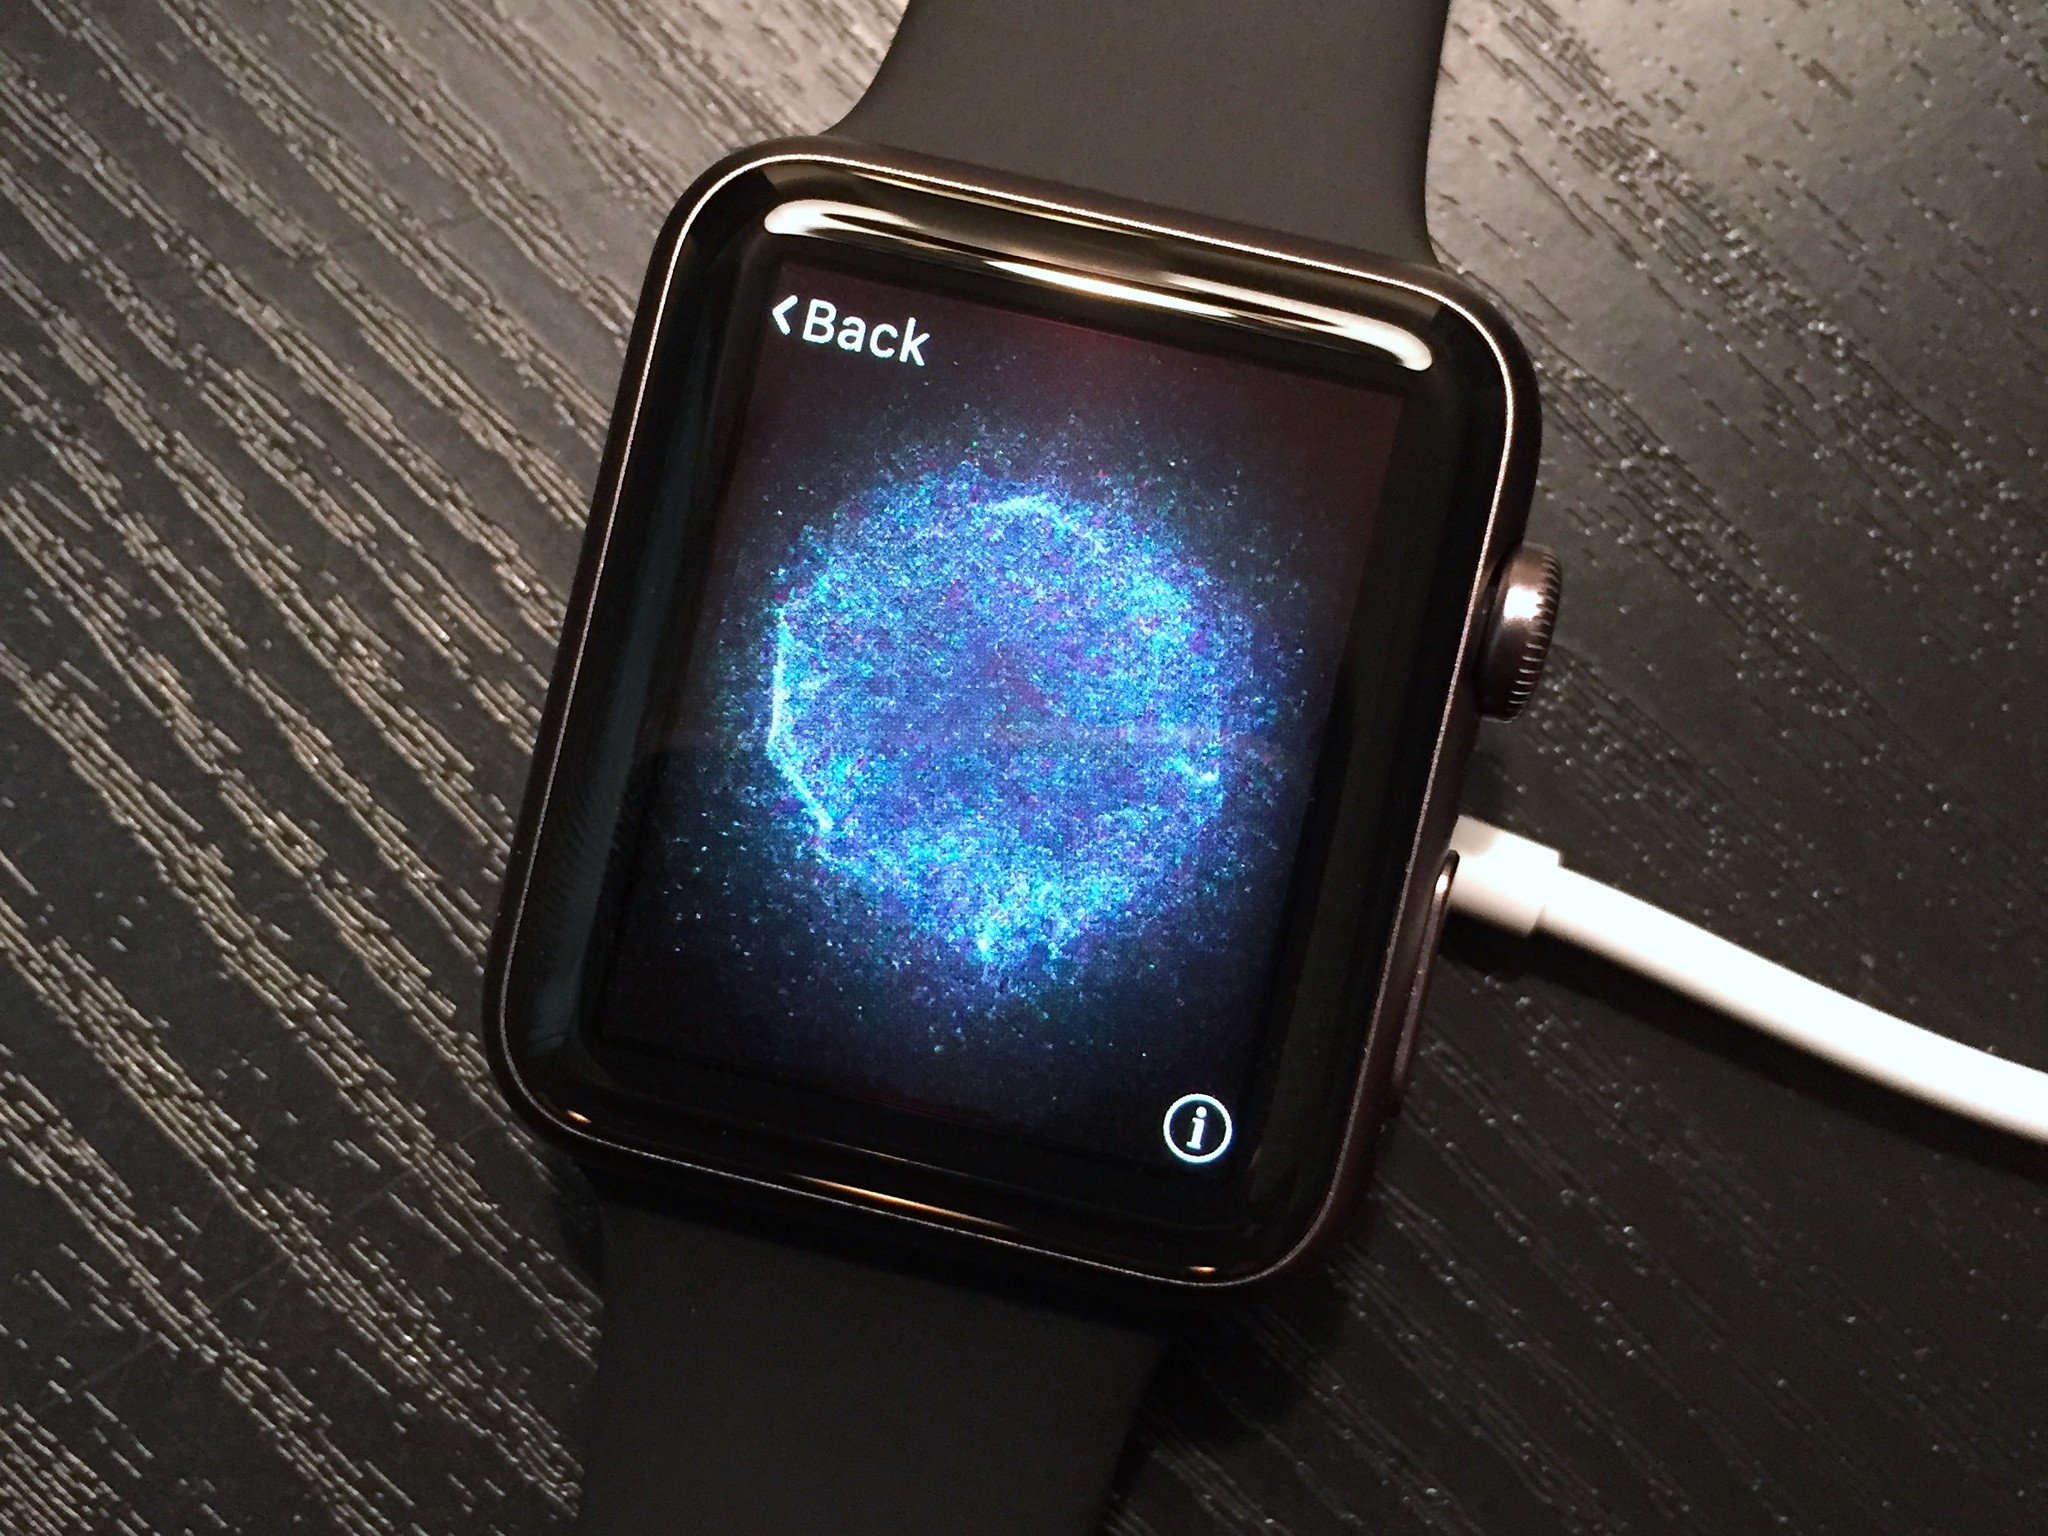 watchOS 4.3.1 beta says support for older watch apps ending soon